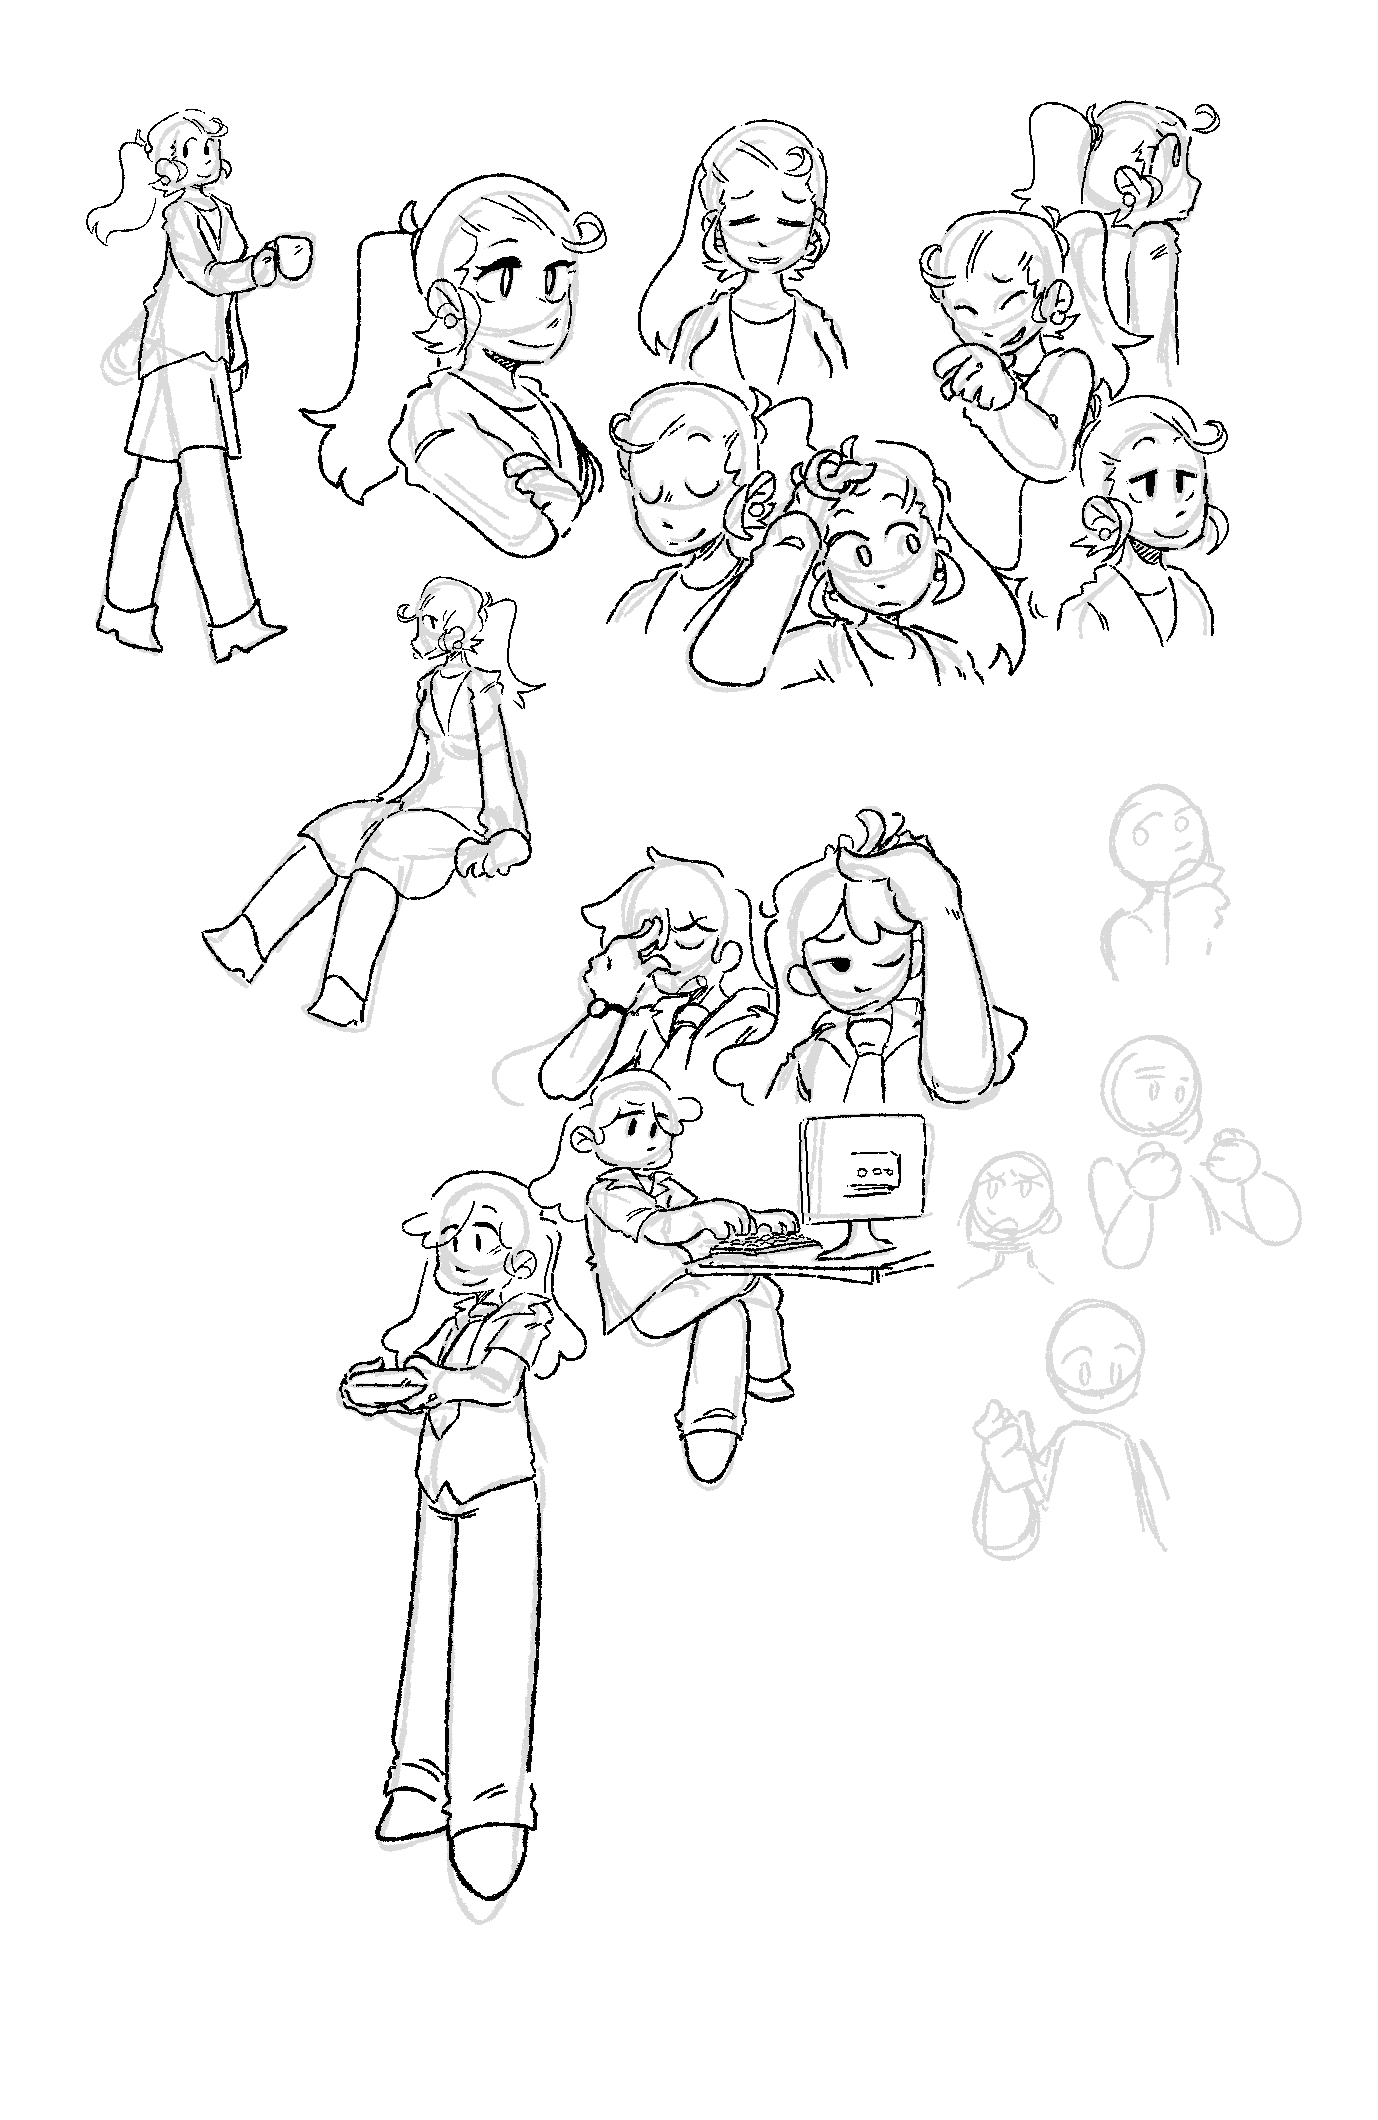 Various sketches of Rachel and Tracy from Commonplace, all in different poses to portray their personalities.